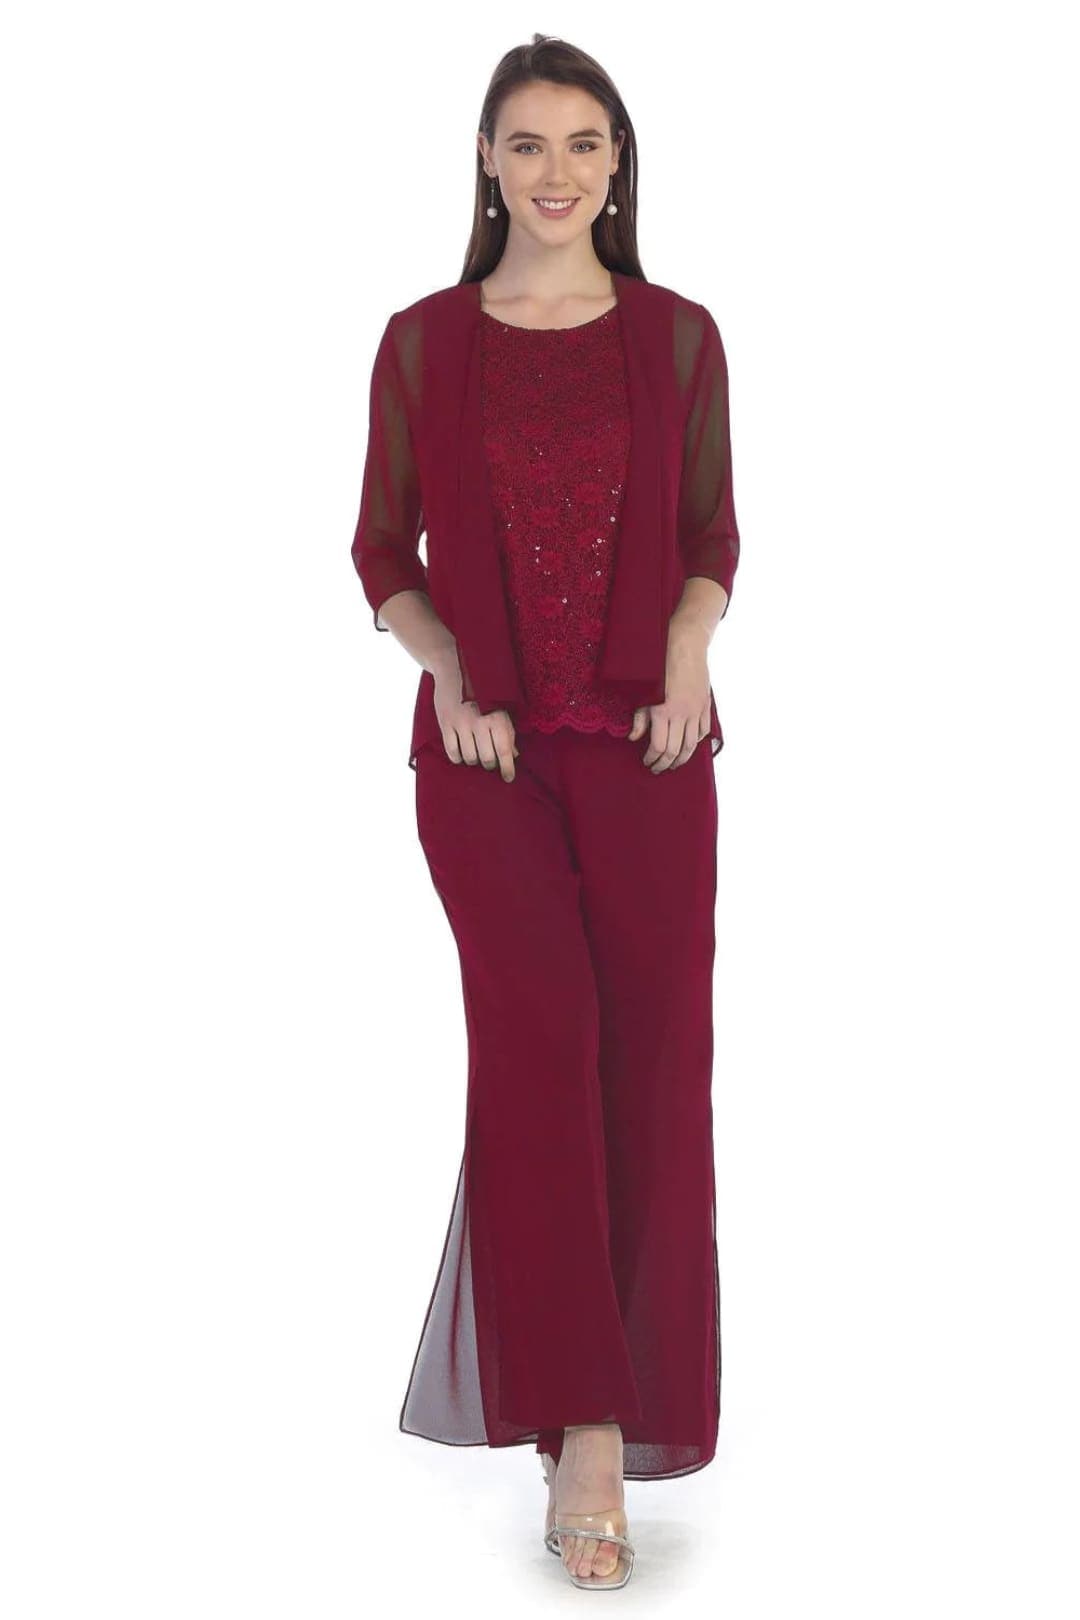 Burgundy Mother of the Bride Jacket Pant Suit for $129.99 – The